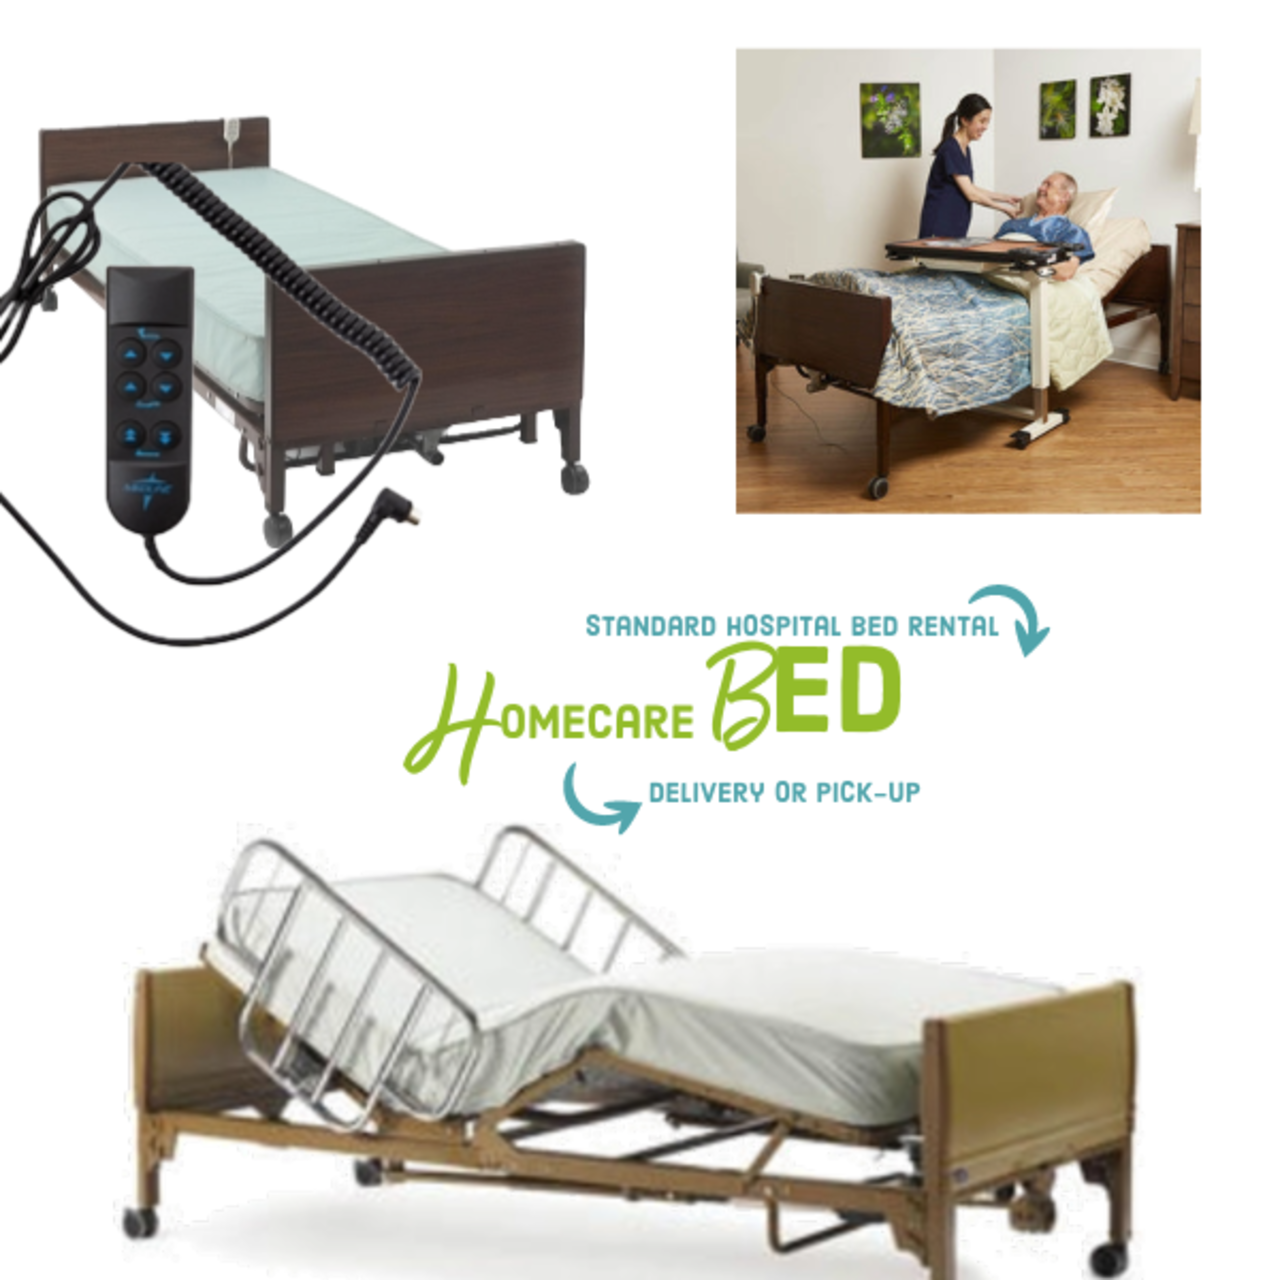 Basic hospital bed for home use